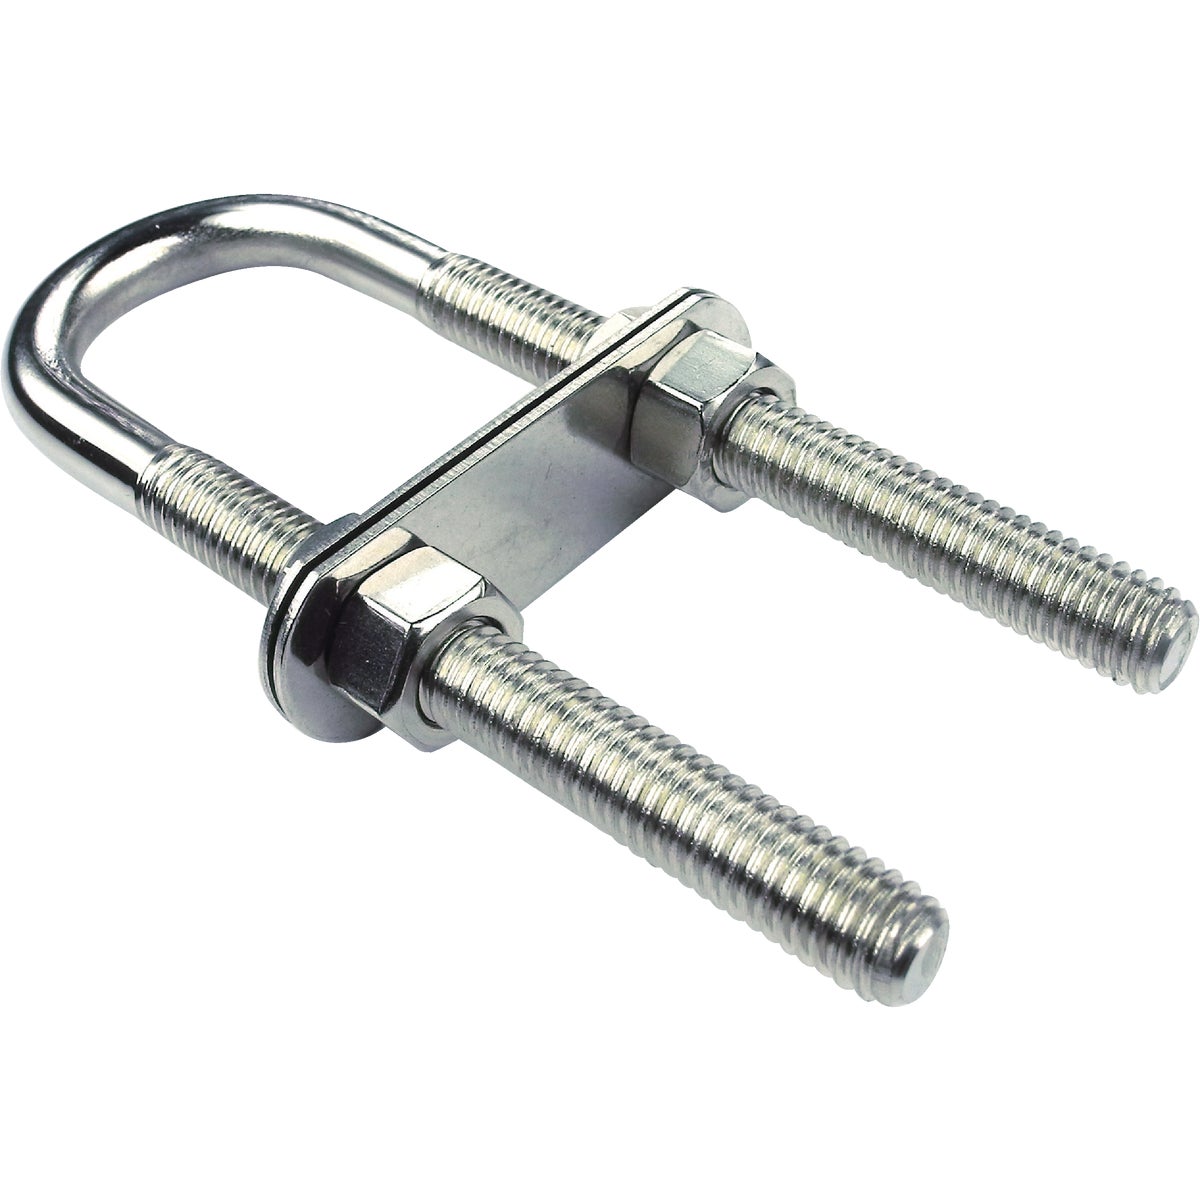 Item 570439, Stainless steel U-bolt used to secure tow lines or to attach boat to 